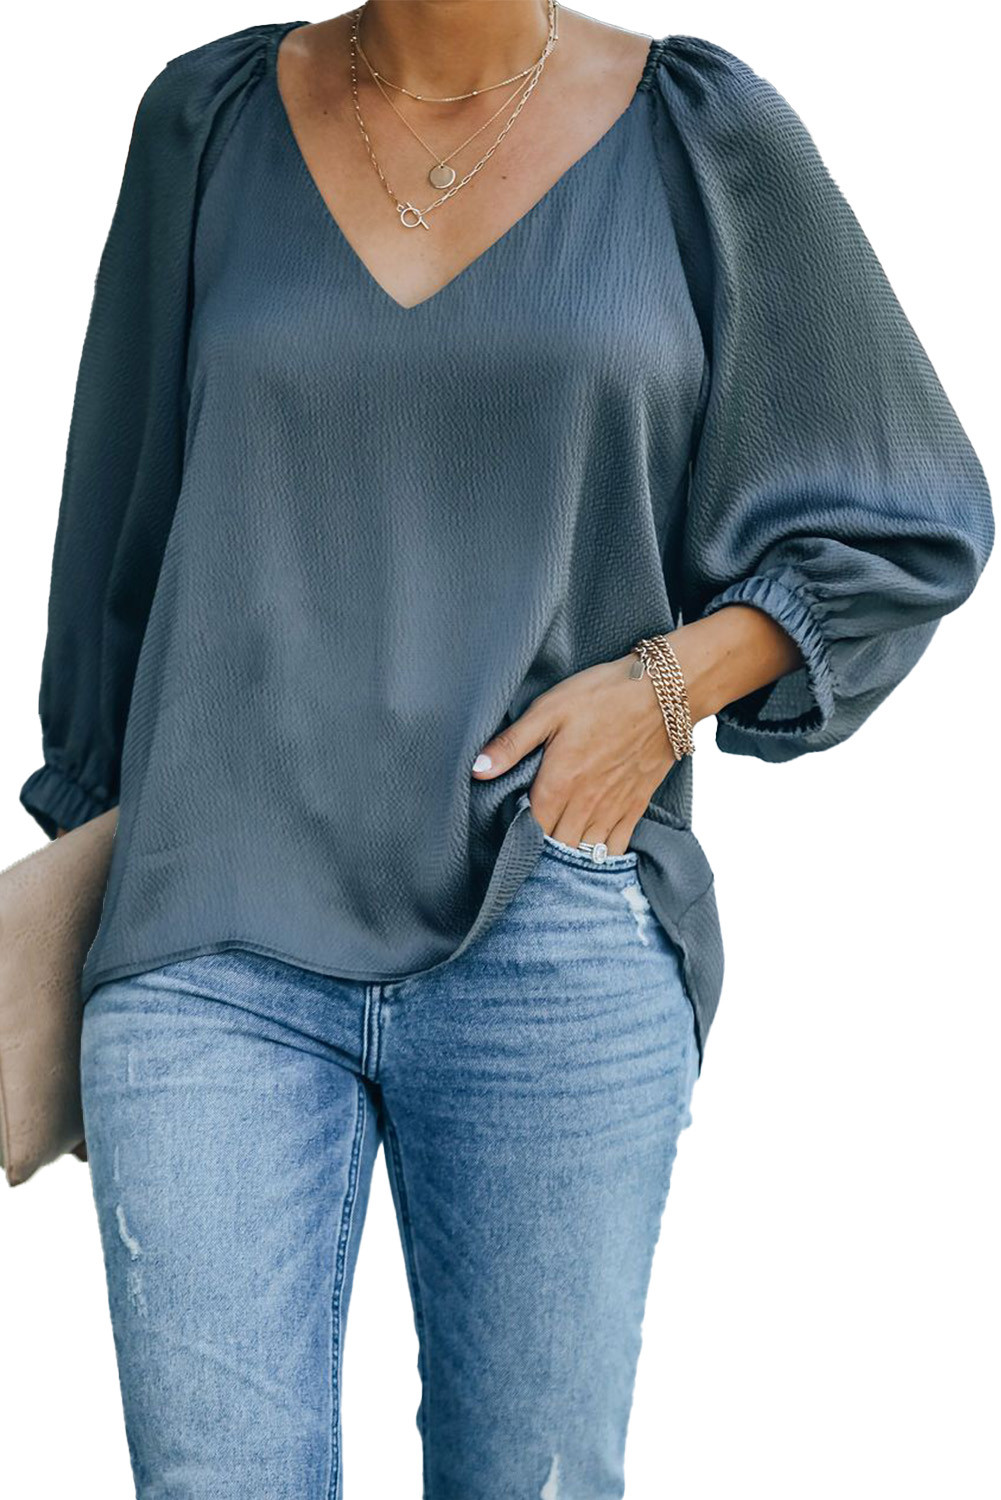 Wholesale Other Category, Cheap Gray V Neck Balloon Sleeves Top Online